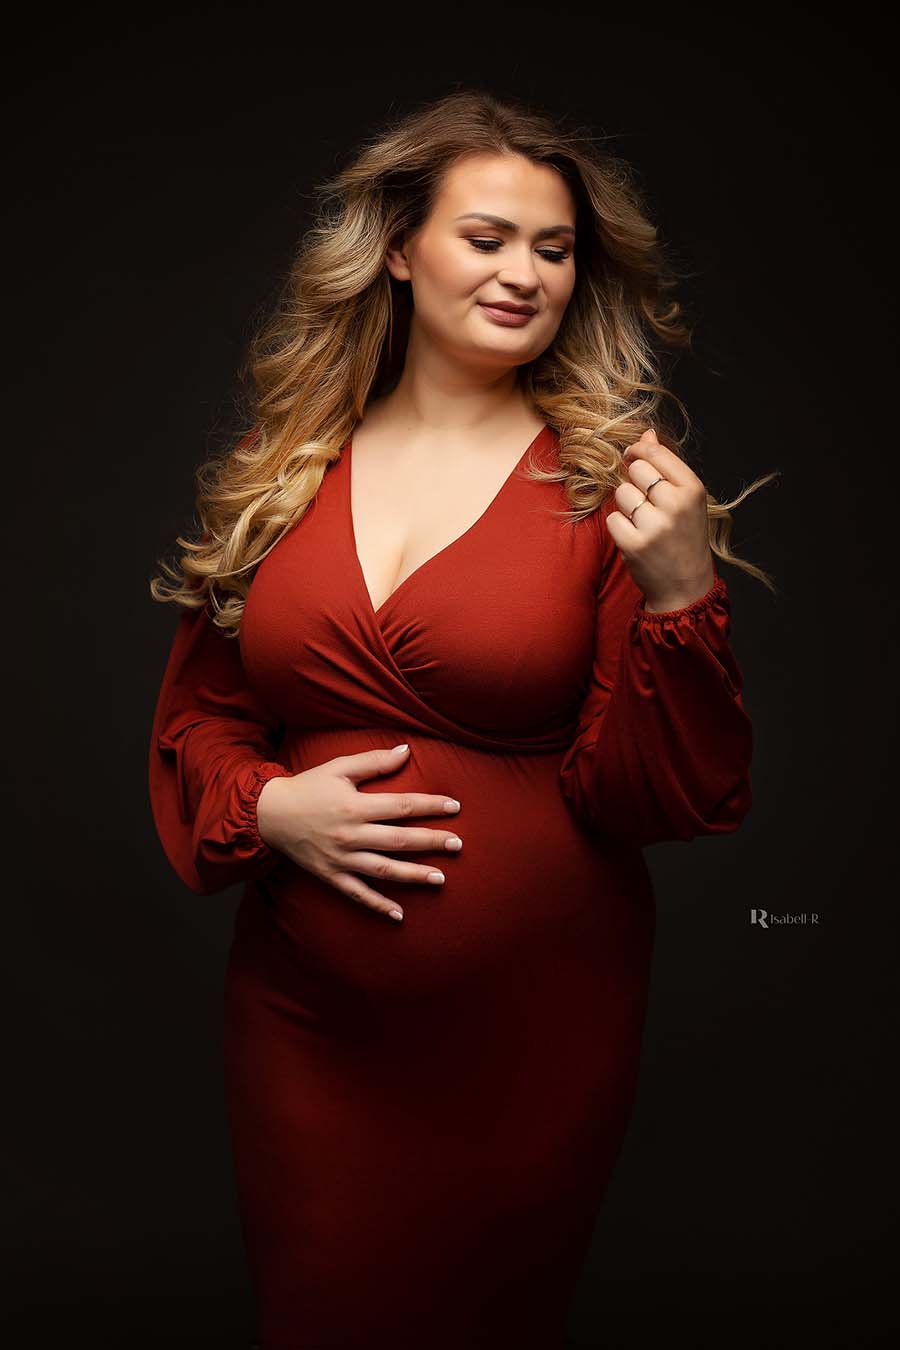 The dress the pregnant woman is wearing has a beautiful rust orange colour. She is looking at her hands. the dress has wide sleeves  and a sweetheart neckline